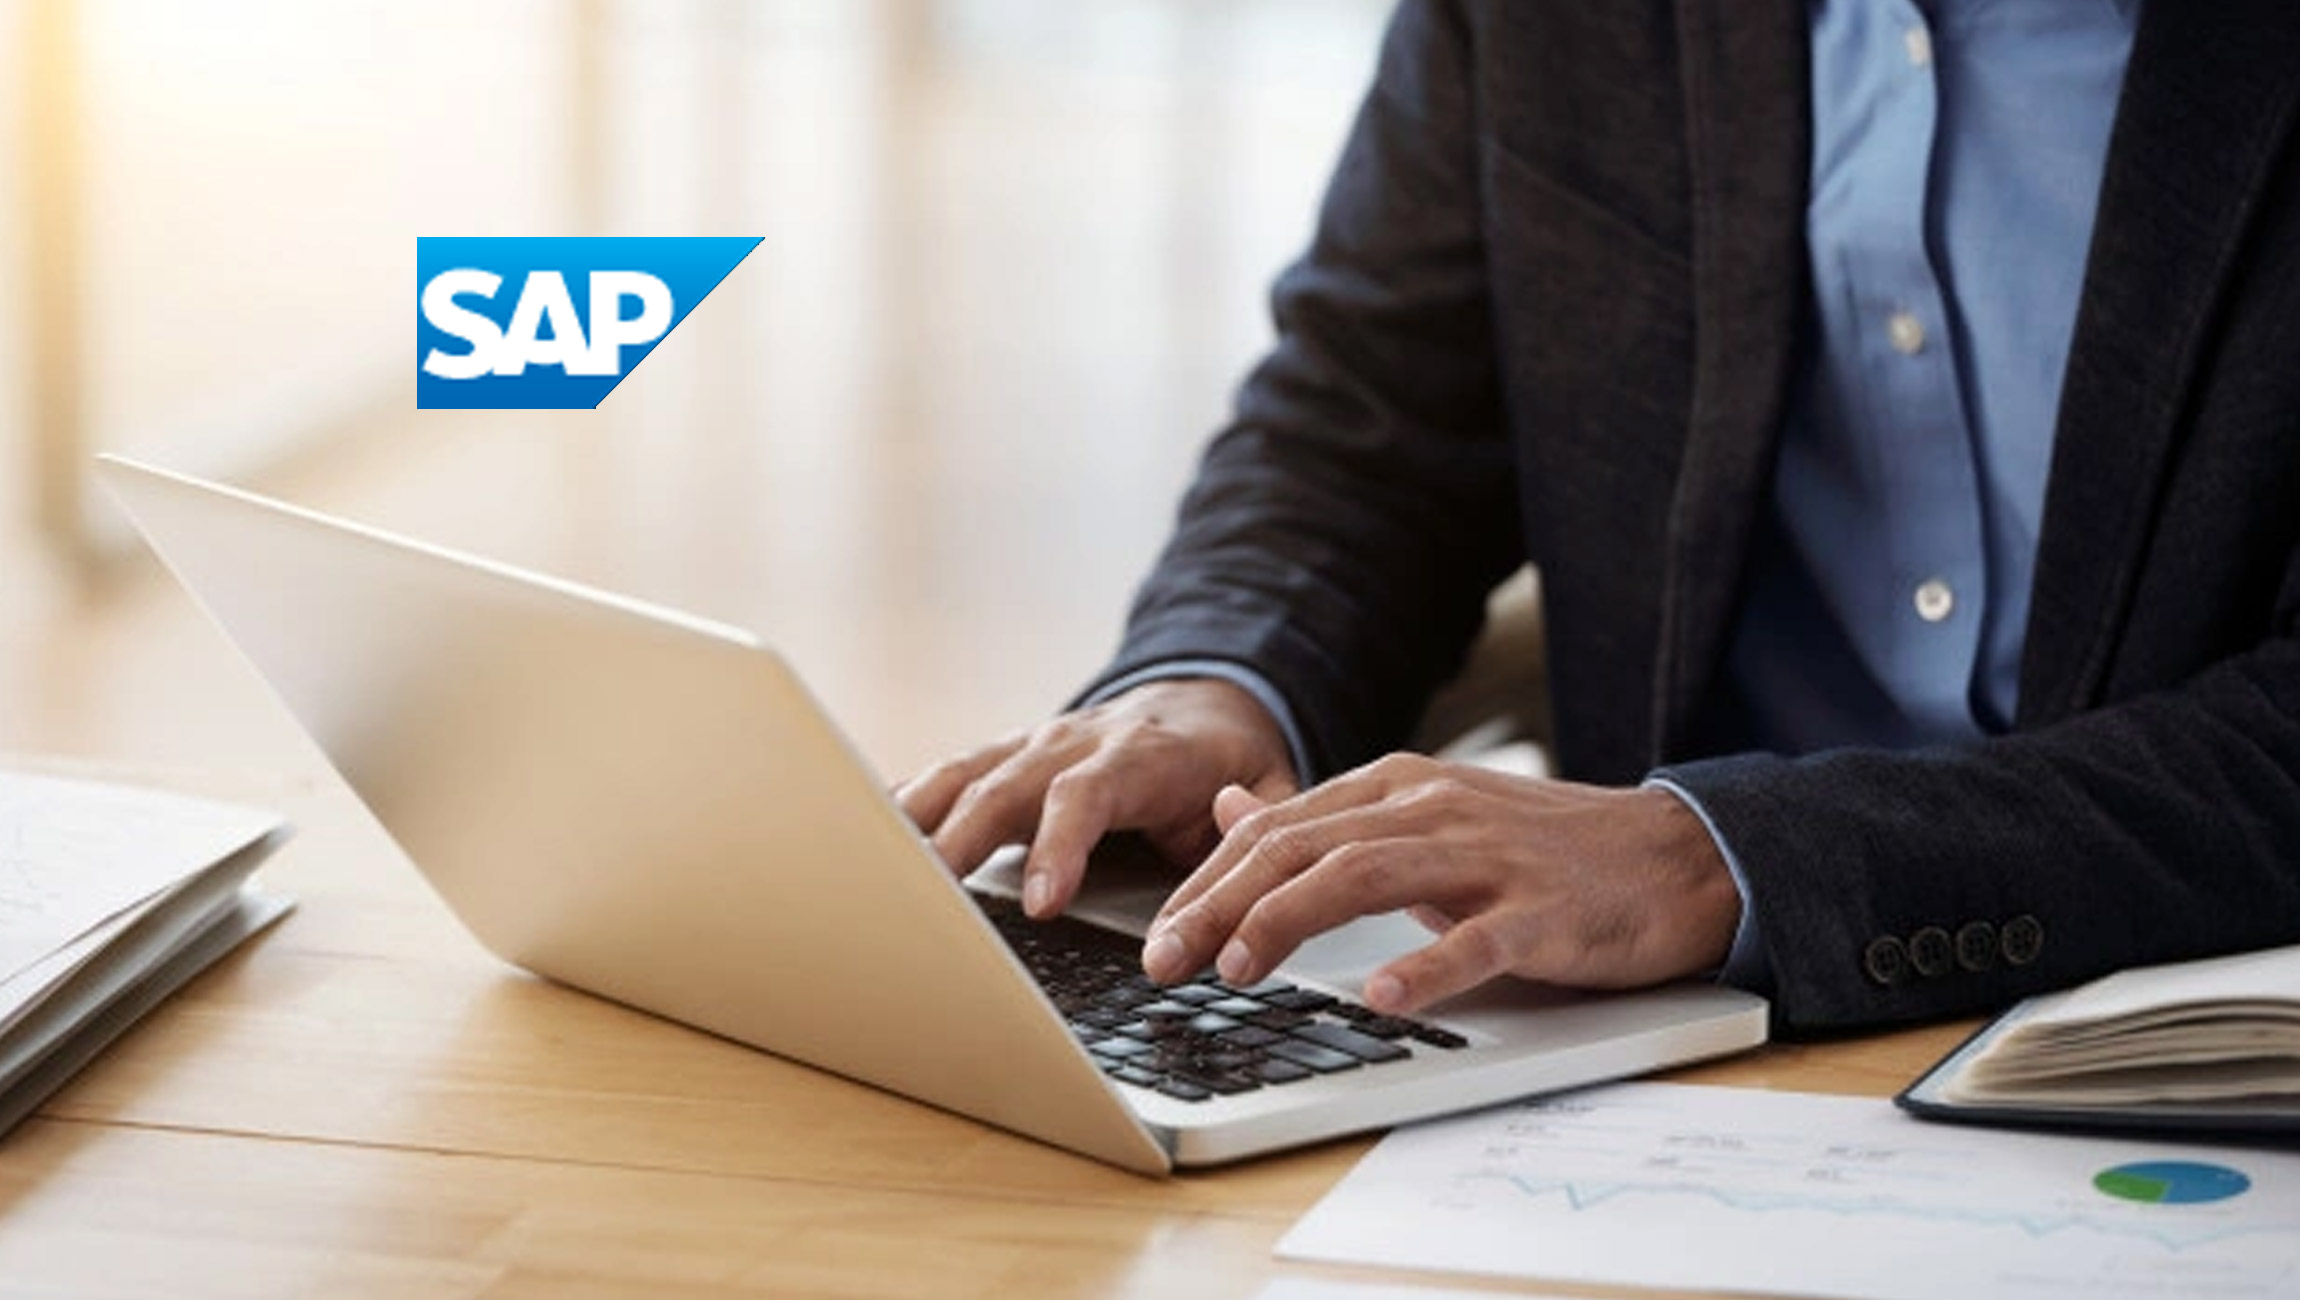 SAP Delivers Innovation to Address Customers’ Most Pressing Needs 1